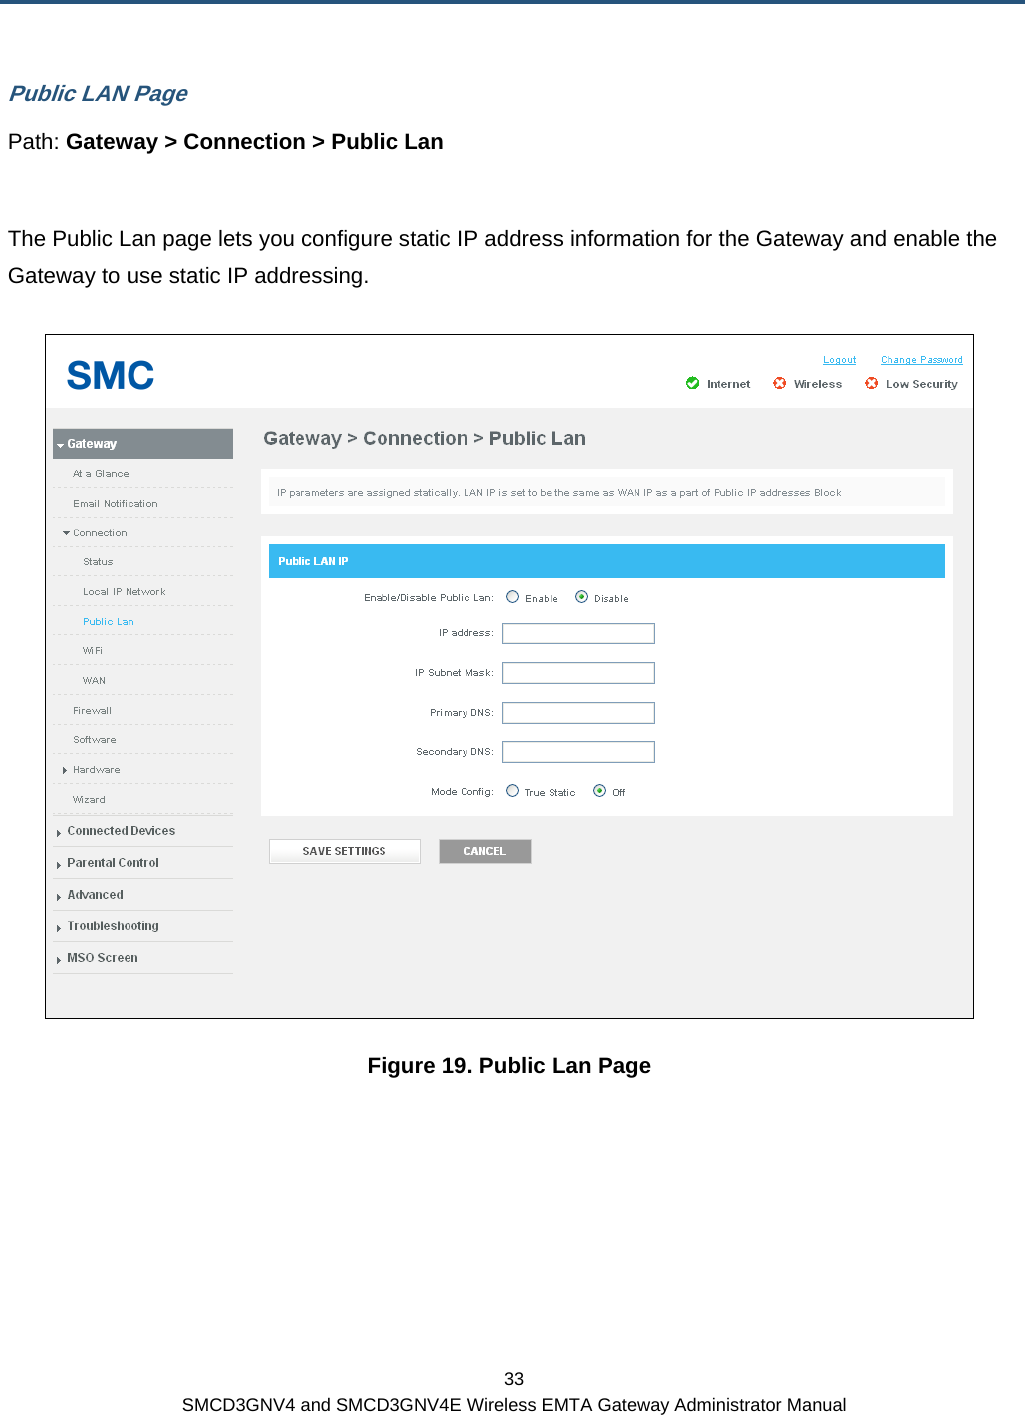  33 SMCD3GNV4 and SMCD3GNV4E Wireless EMTA Gateway Administrator Manual Public LAN Page Path: Gateway &gt; Connection &gt; Public Lan  The Public Lan page lets you configure static IP address information for the Gateway and enable the Gateway to use static IP addressing.  Figure 19. Public Lan Page 